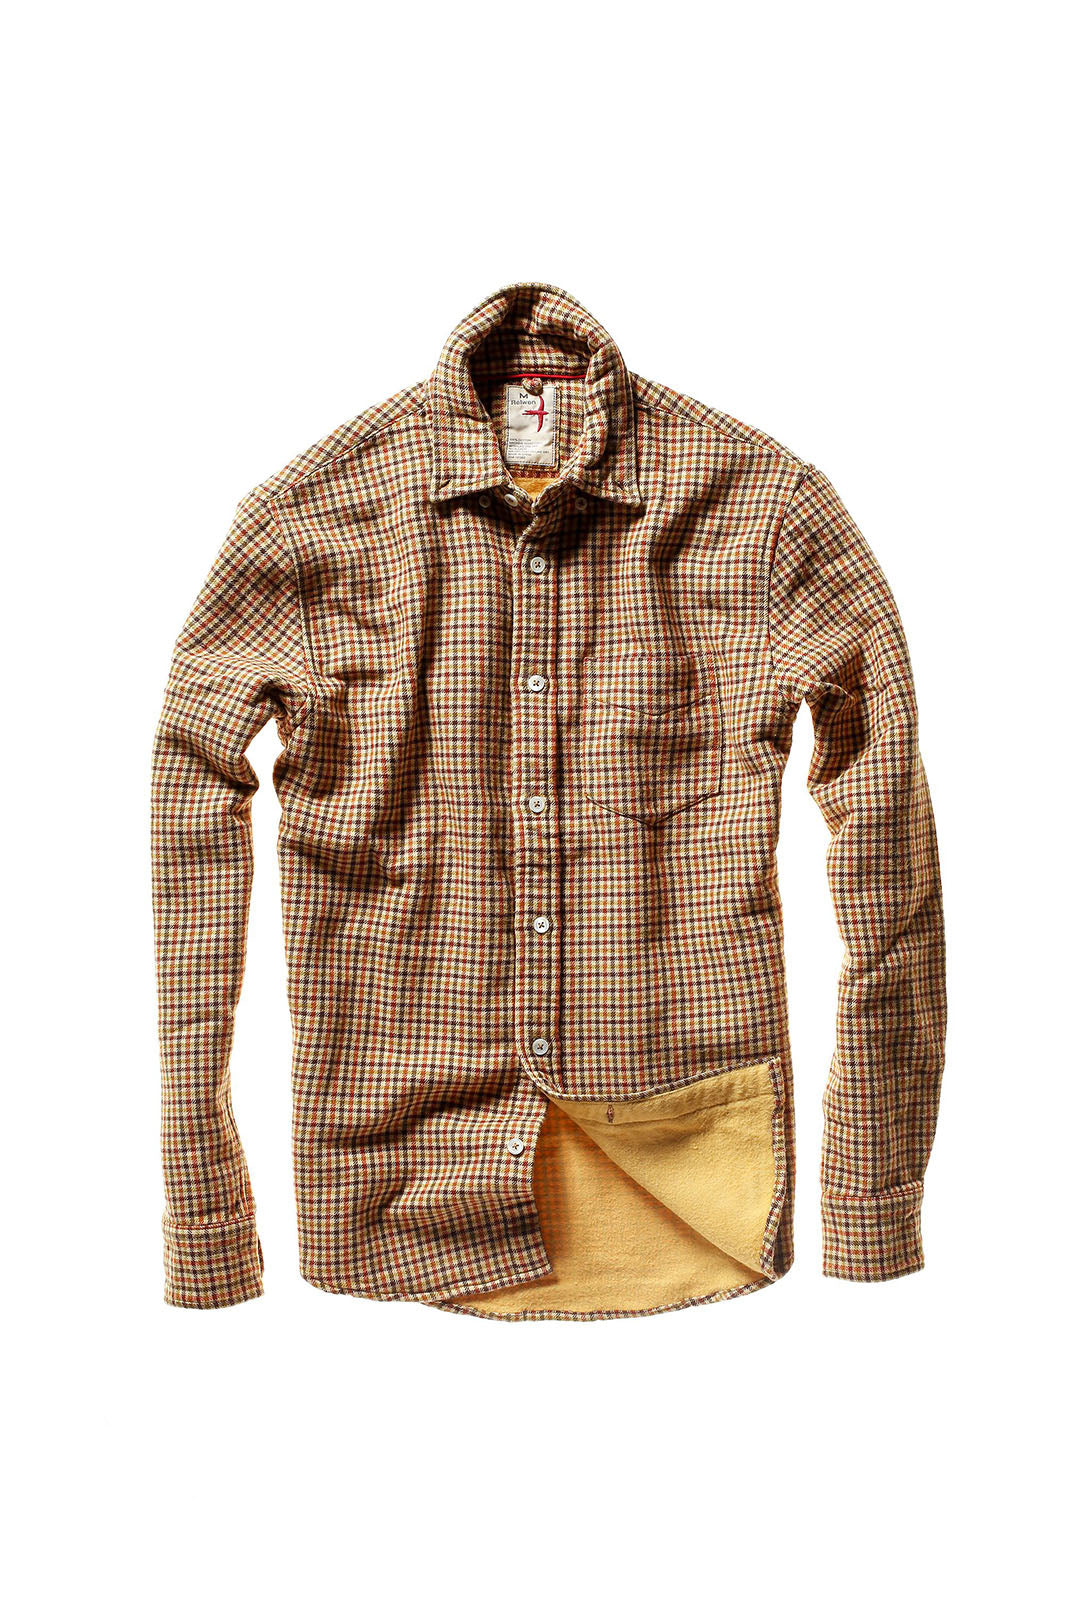 Chamois Lined Flannel Shirt - Wheat Multi Check